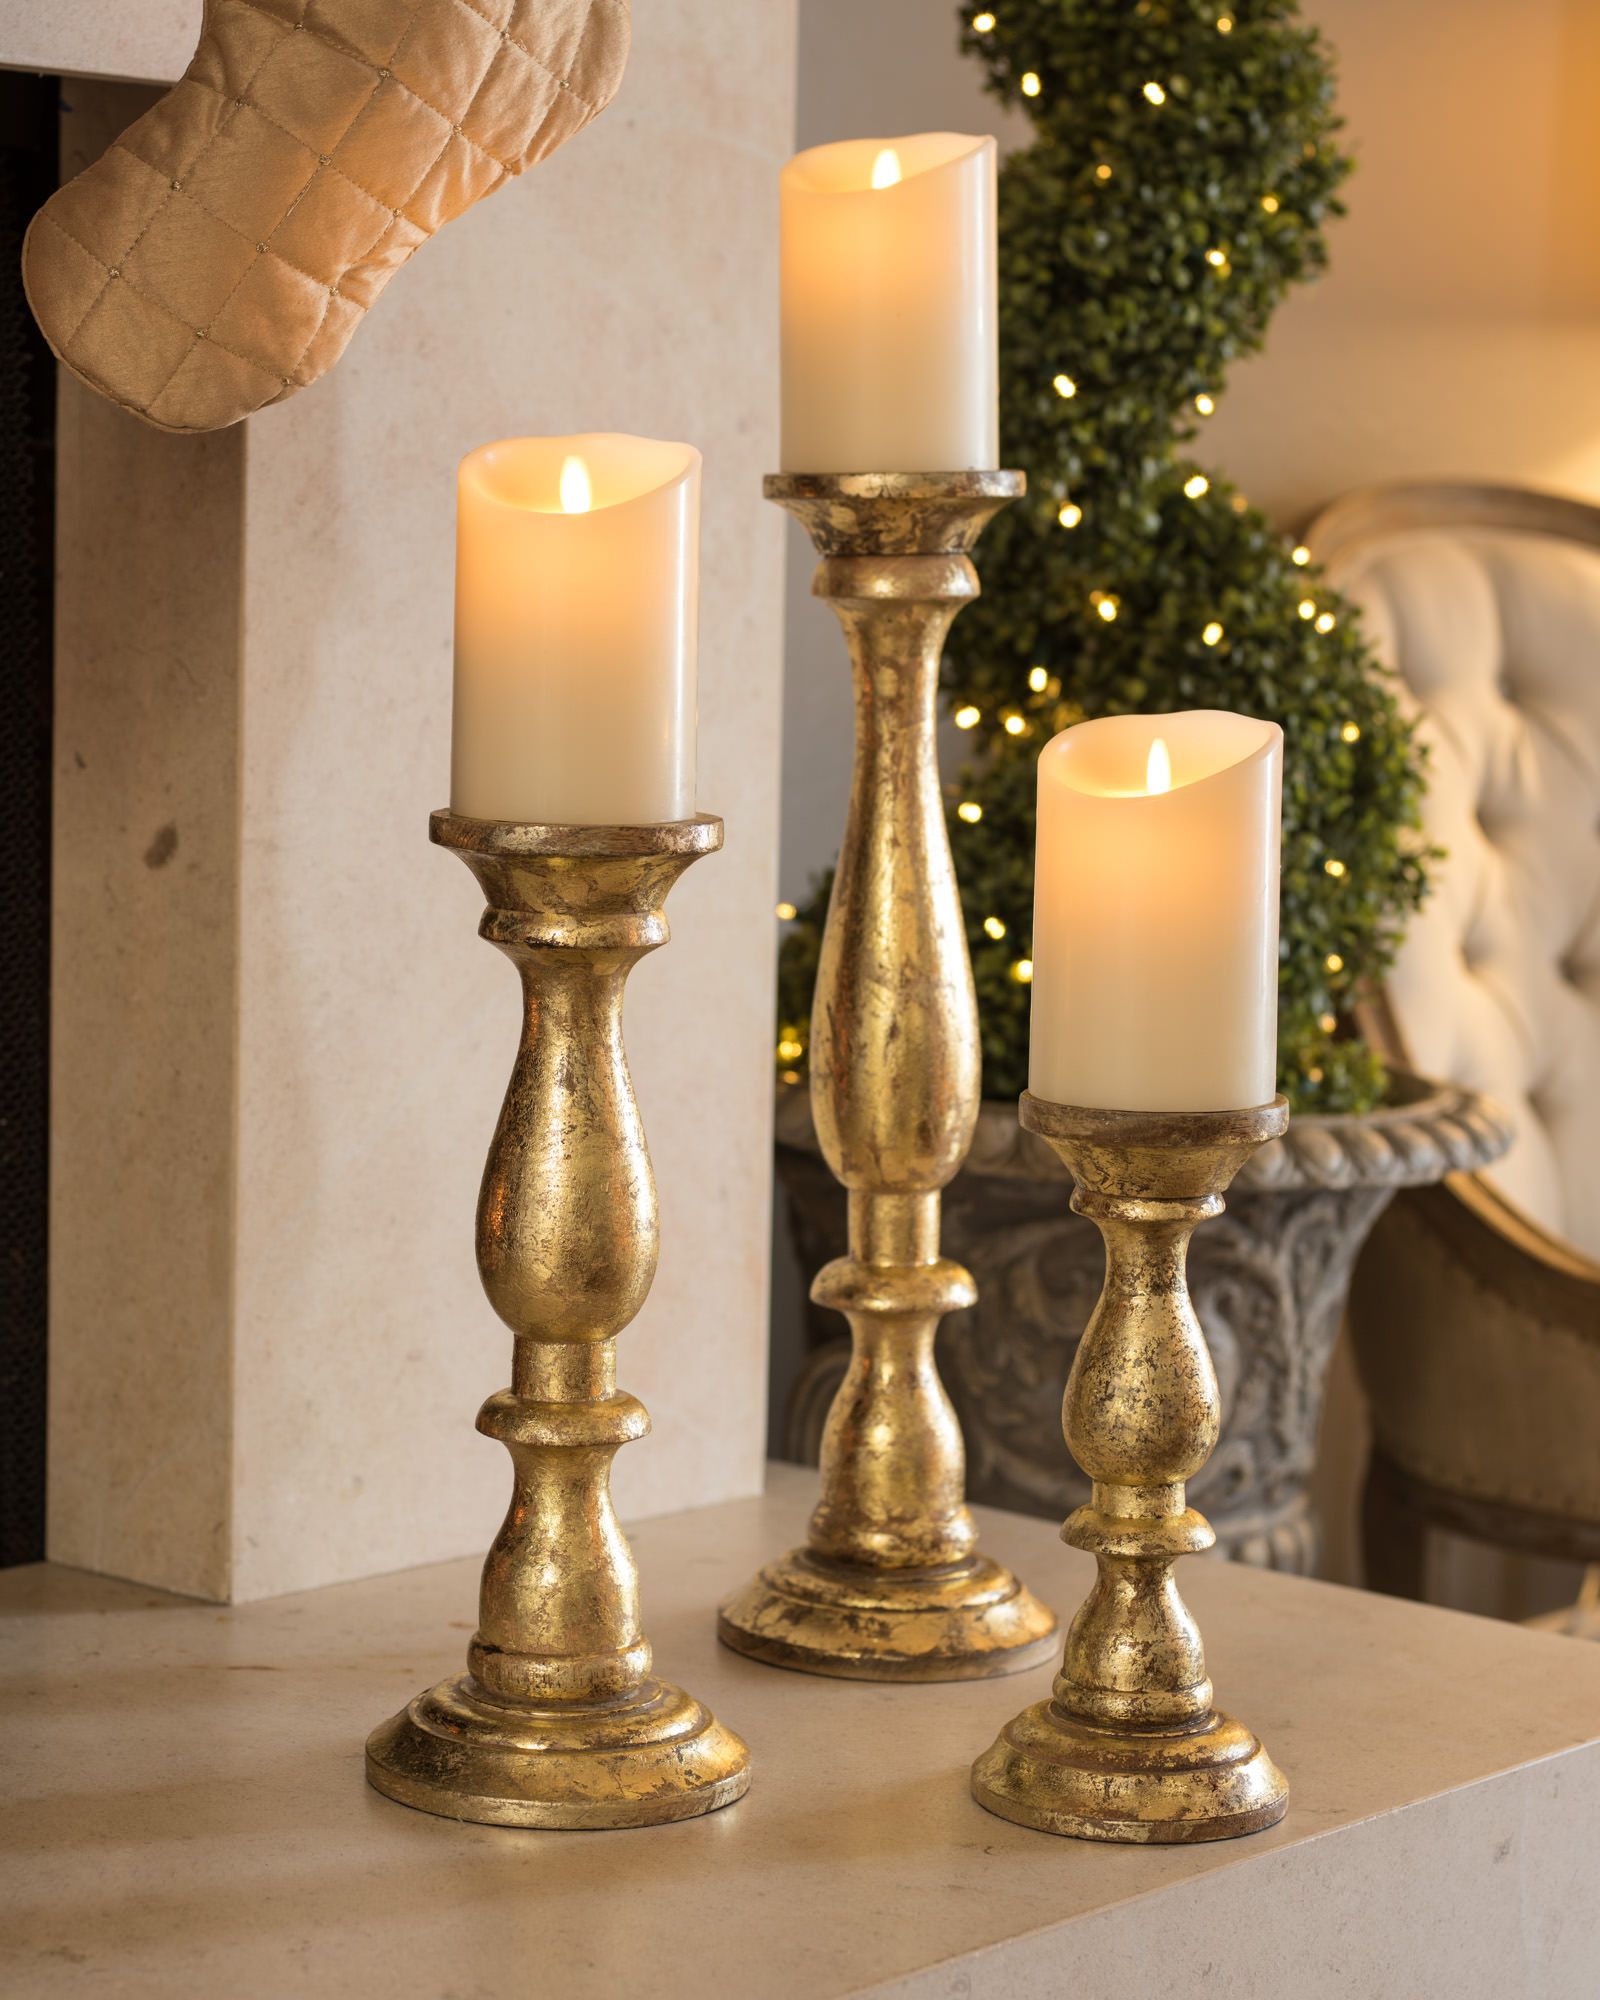 Flameless Candles for Fireplace Inspirational Pin by Judy Wicker On Candles and Candle Holders In 2019